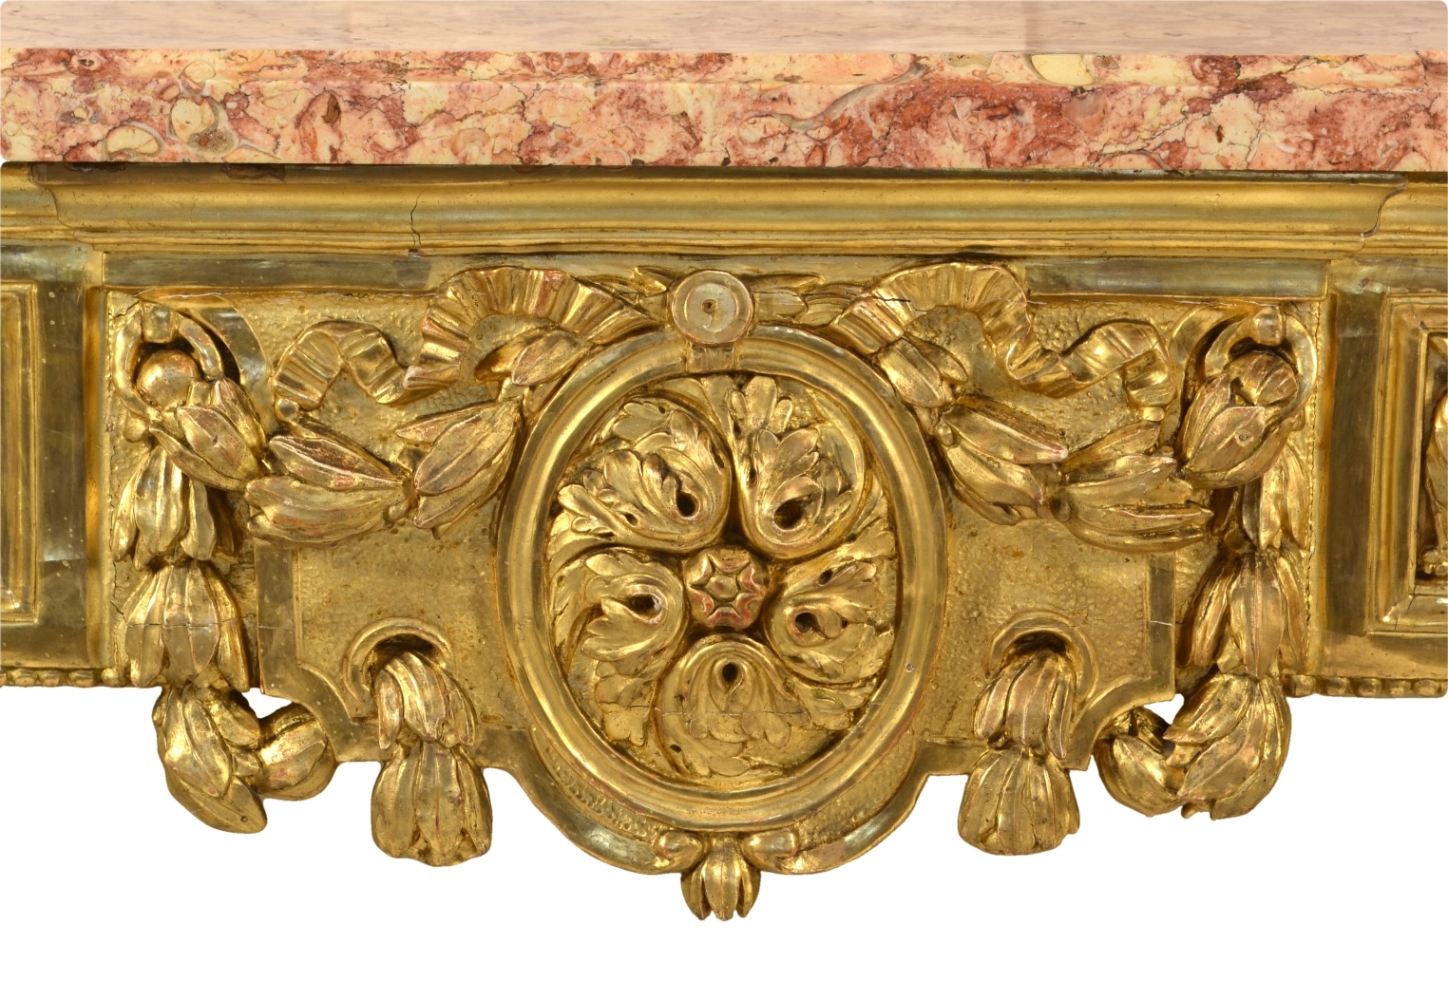 Fine Italian Carved and Giltwood Neoclassical Console Table, c.1790